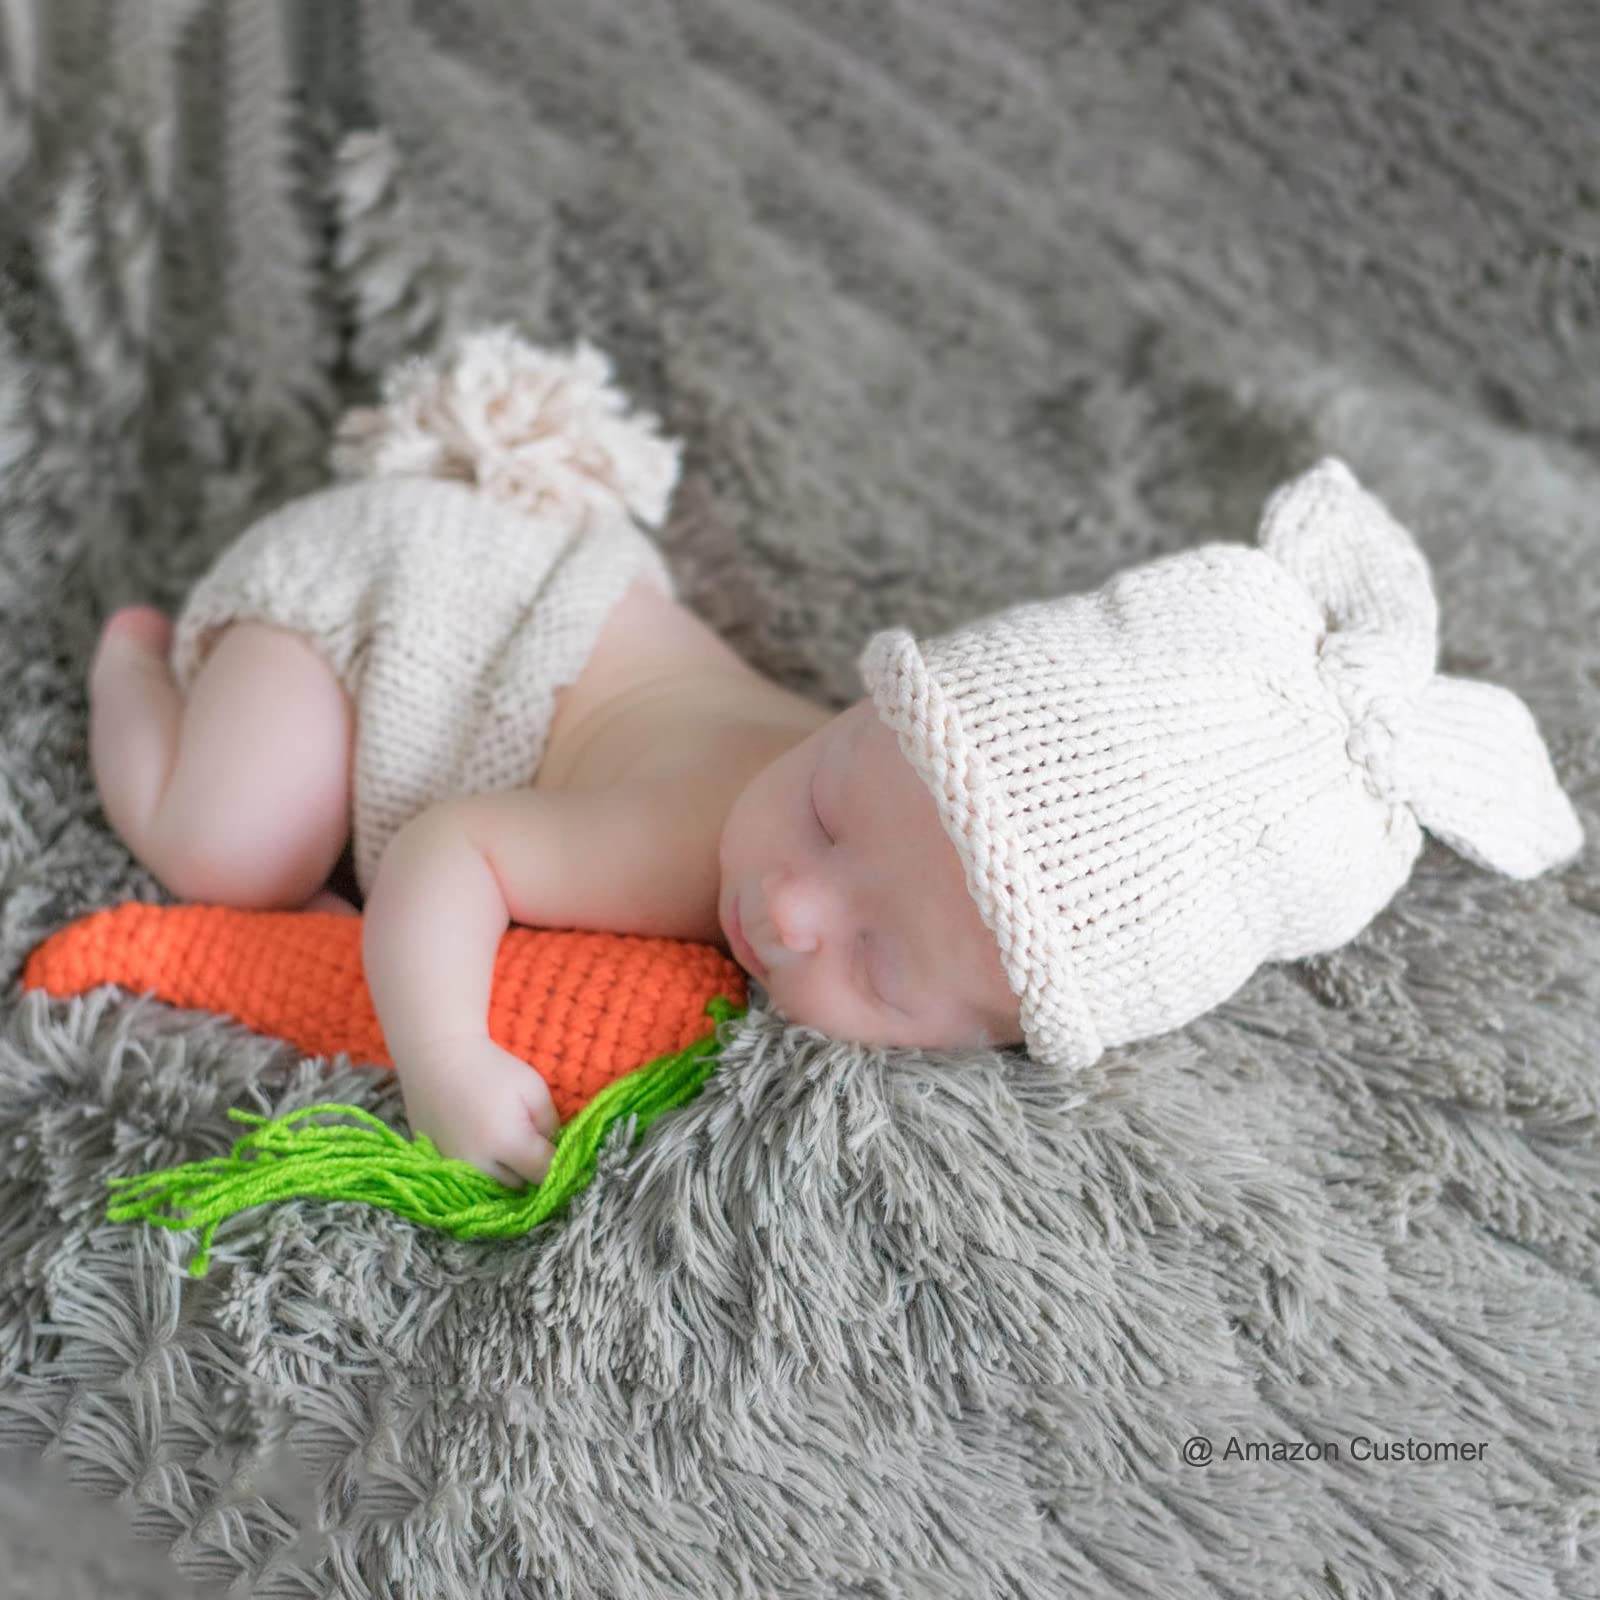 ISOCUTE Newborn Photography Props Baby Easter Bunny Outfits Handmade Crochet Rabbit Set